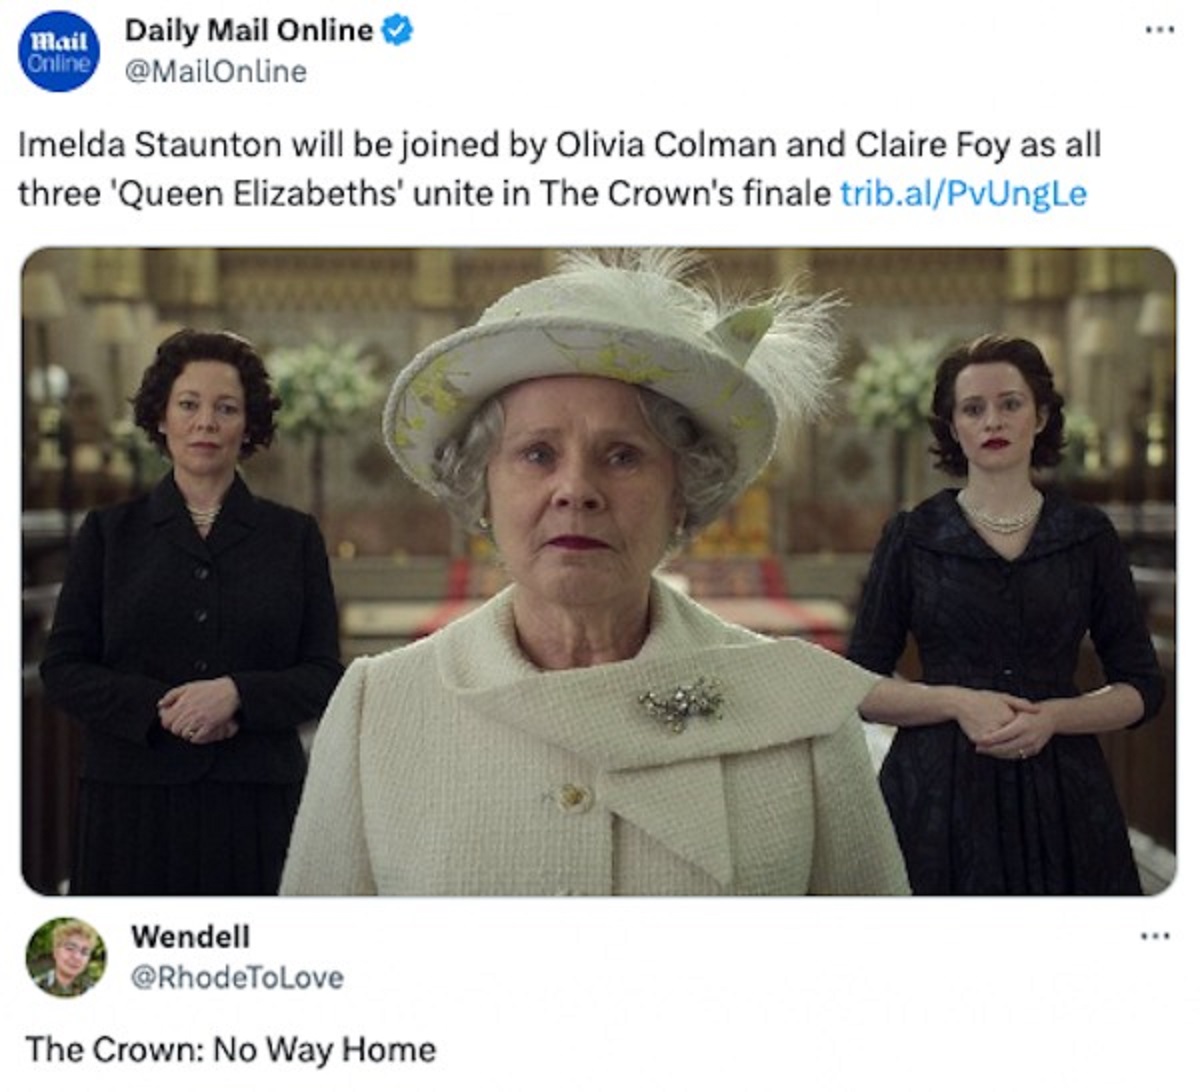 conversation - mail Daily Mail Online Online Imelda Staunton will be joined by Olivia Colman and Claire Foy as all three 'Queen Elizabeths' unite in The Crown's finale trib.alPvUngLe Wendell The Crown No Way Home